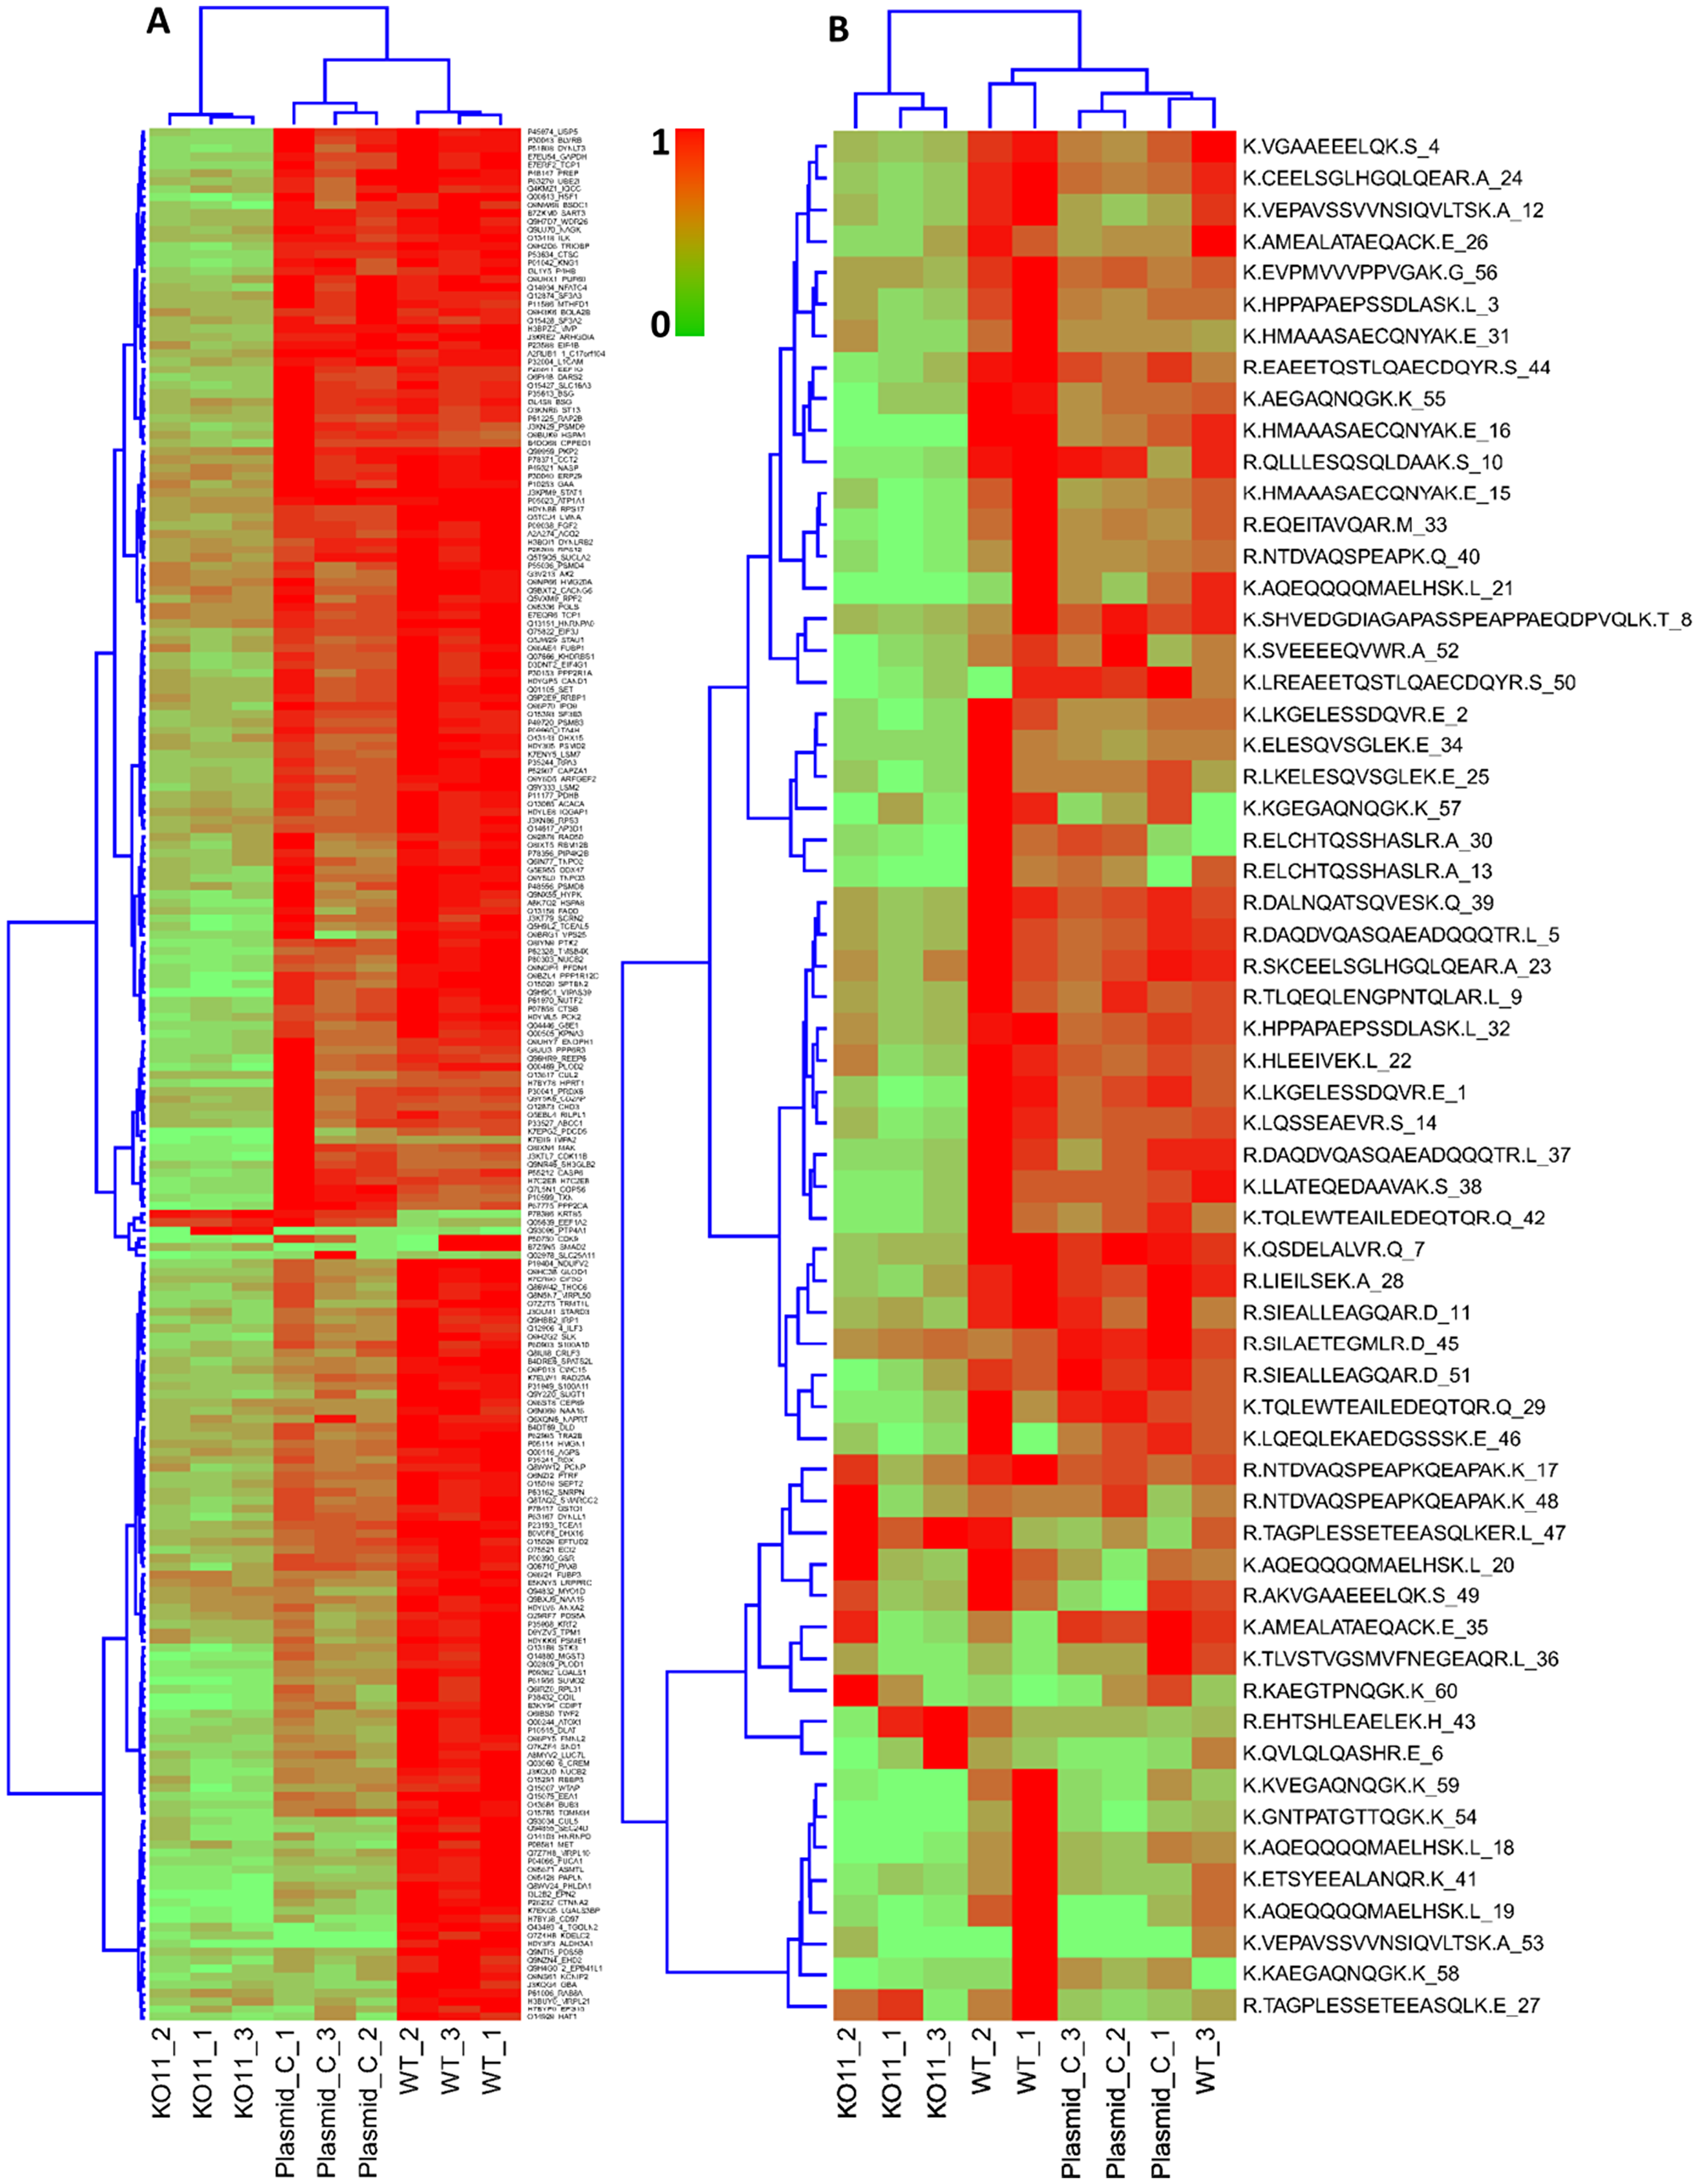 Hierarchical clustering and heat map of differentially expressed proteins and peptides.